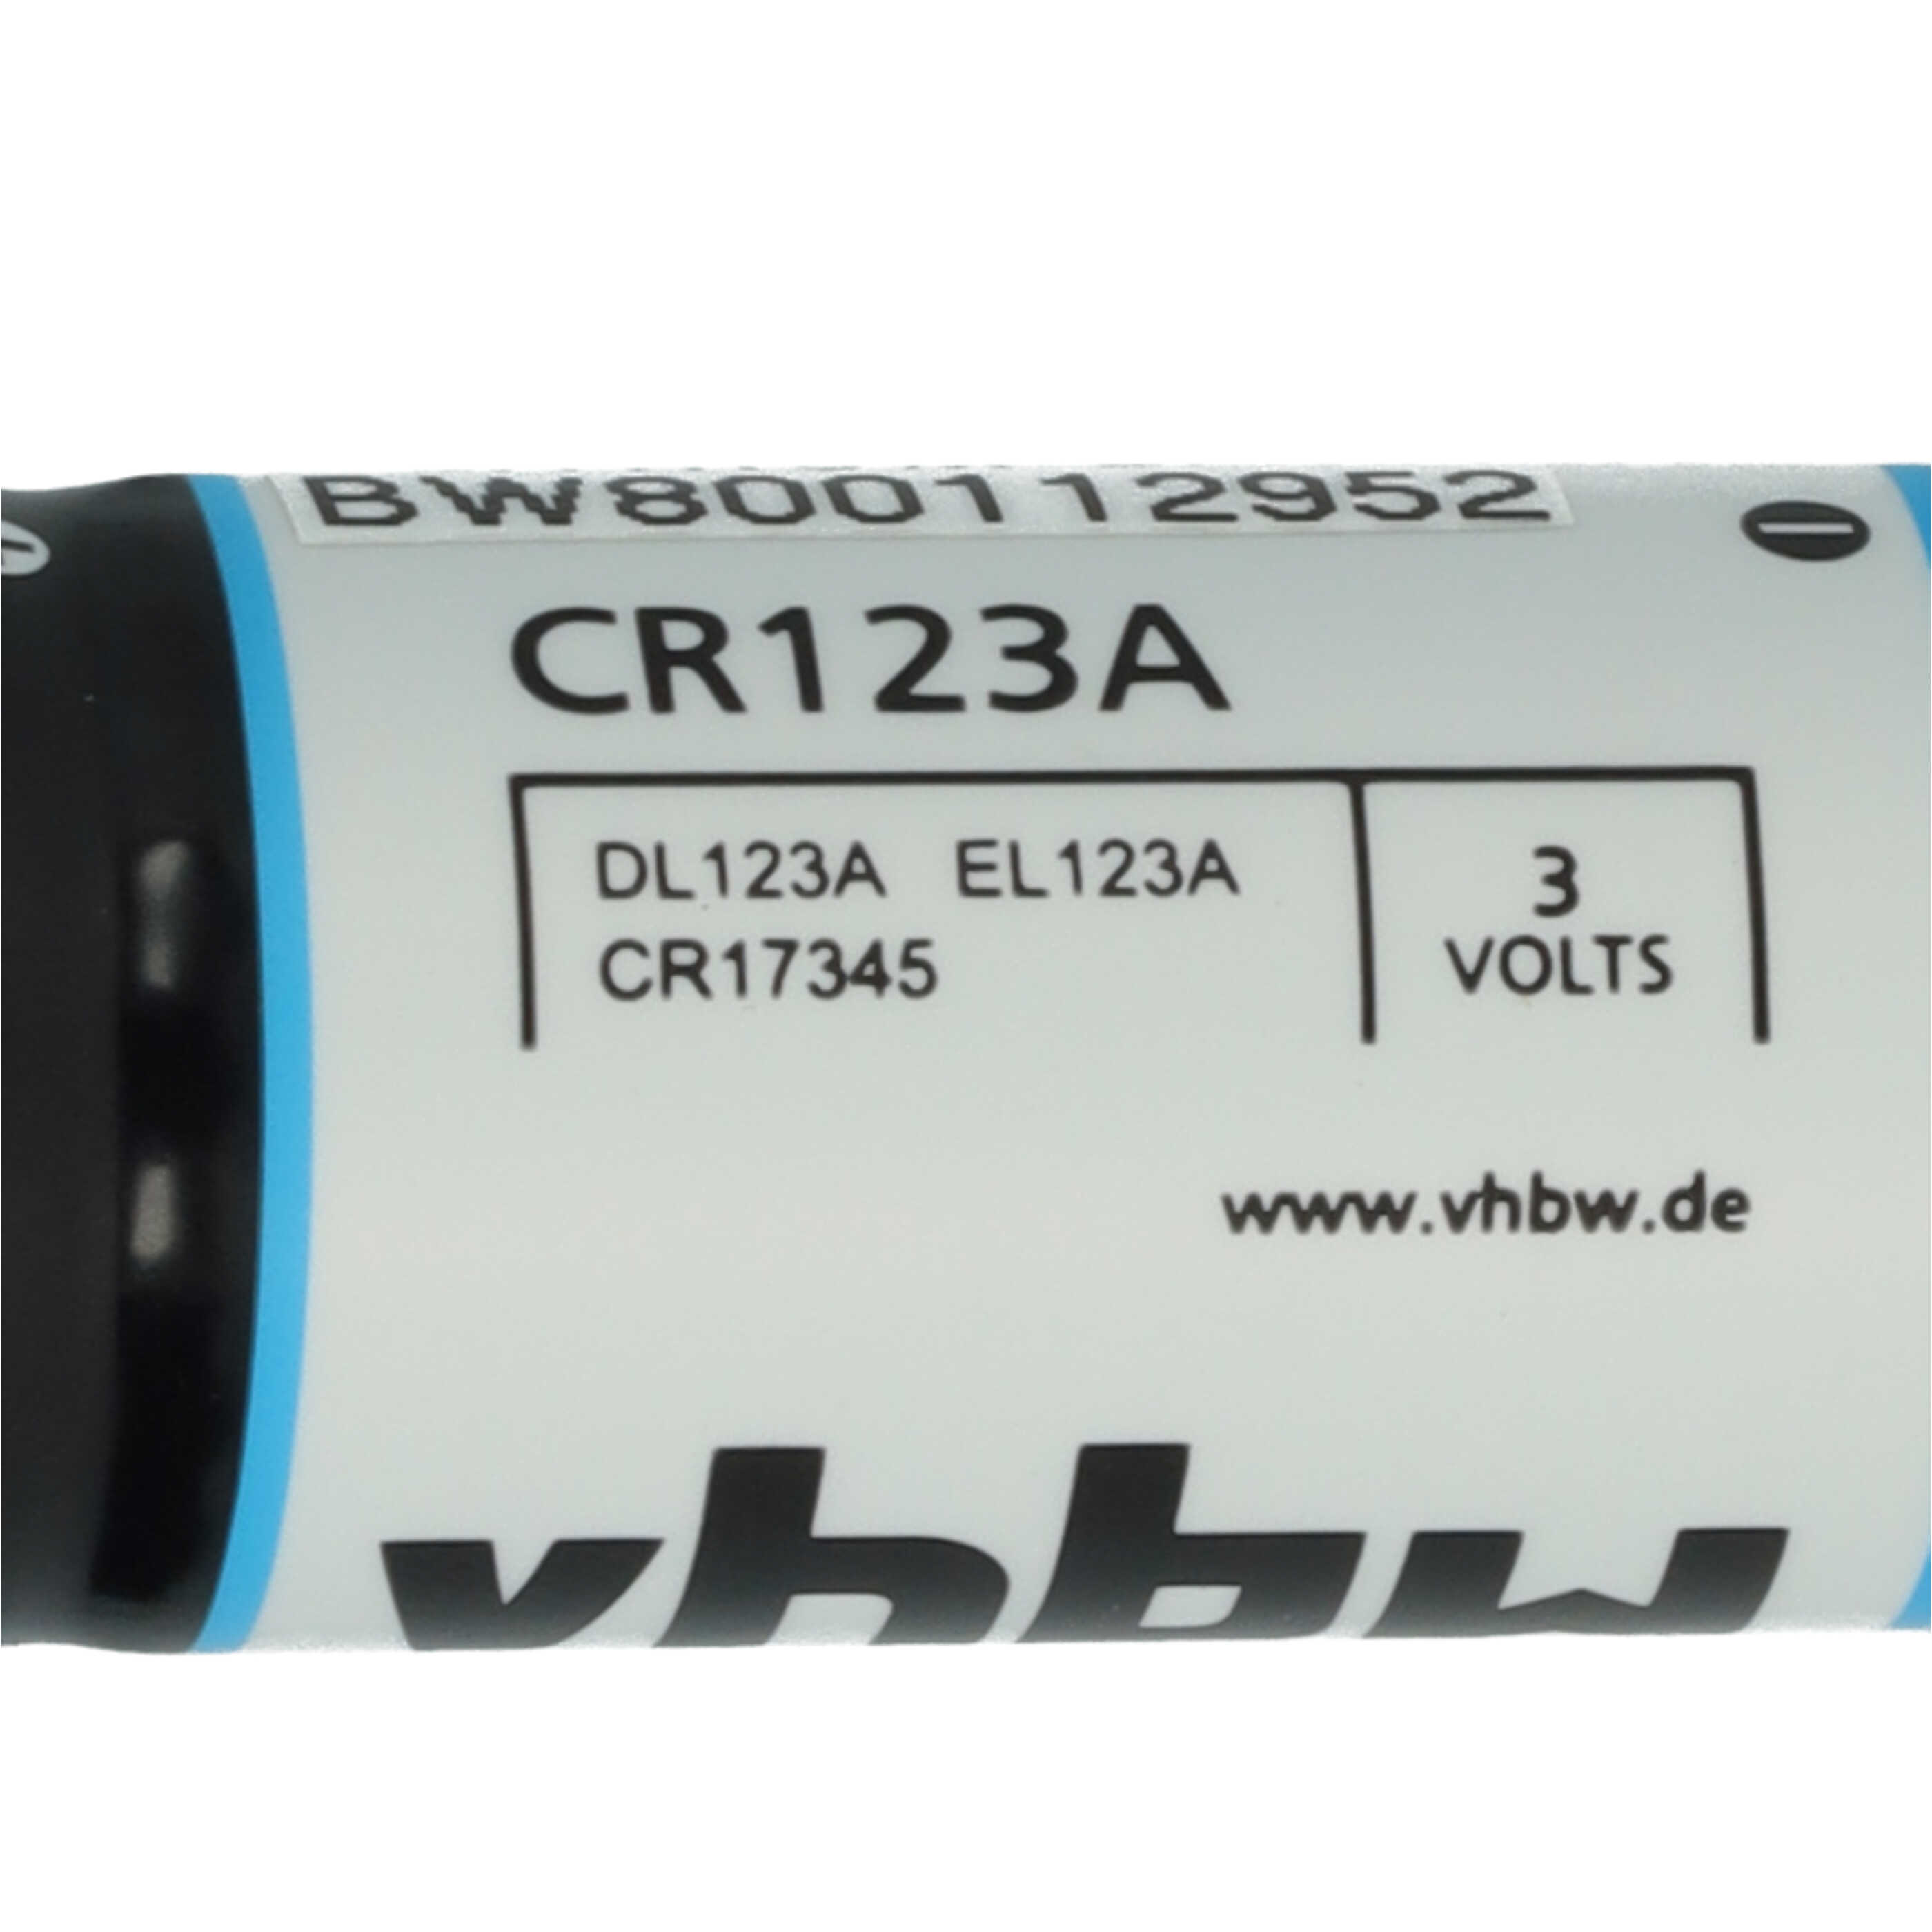 Universal Battery (2 Units) Replacement for 16340, CR17435, DL123A, CR17345, CR123A - 1600mAh 3V Li-Ion